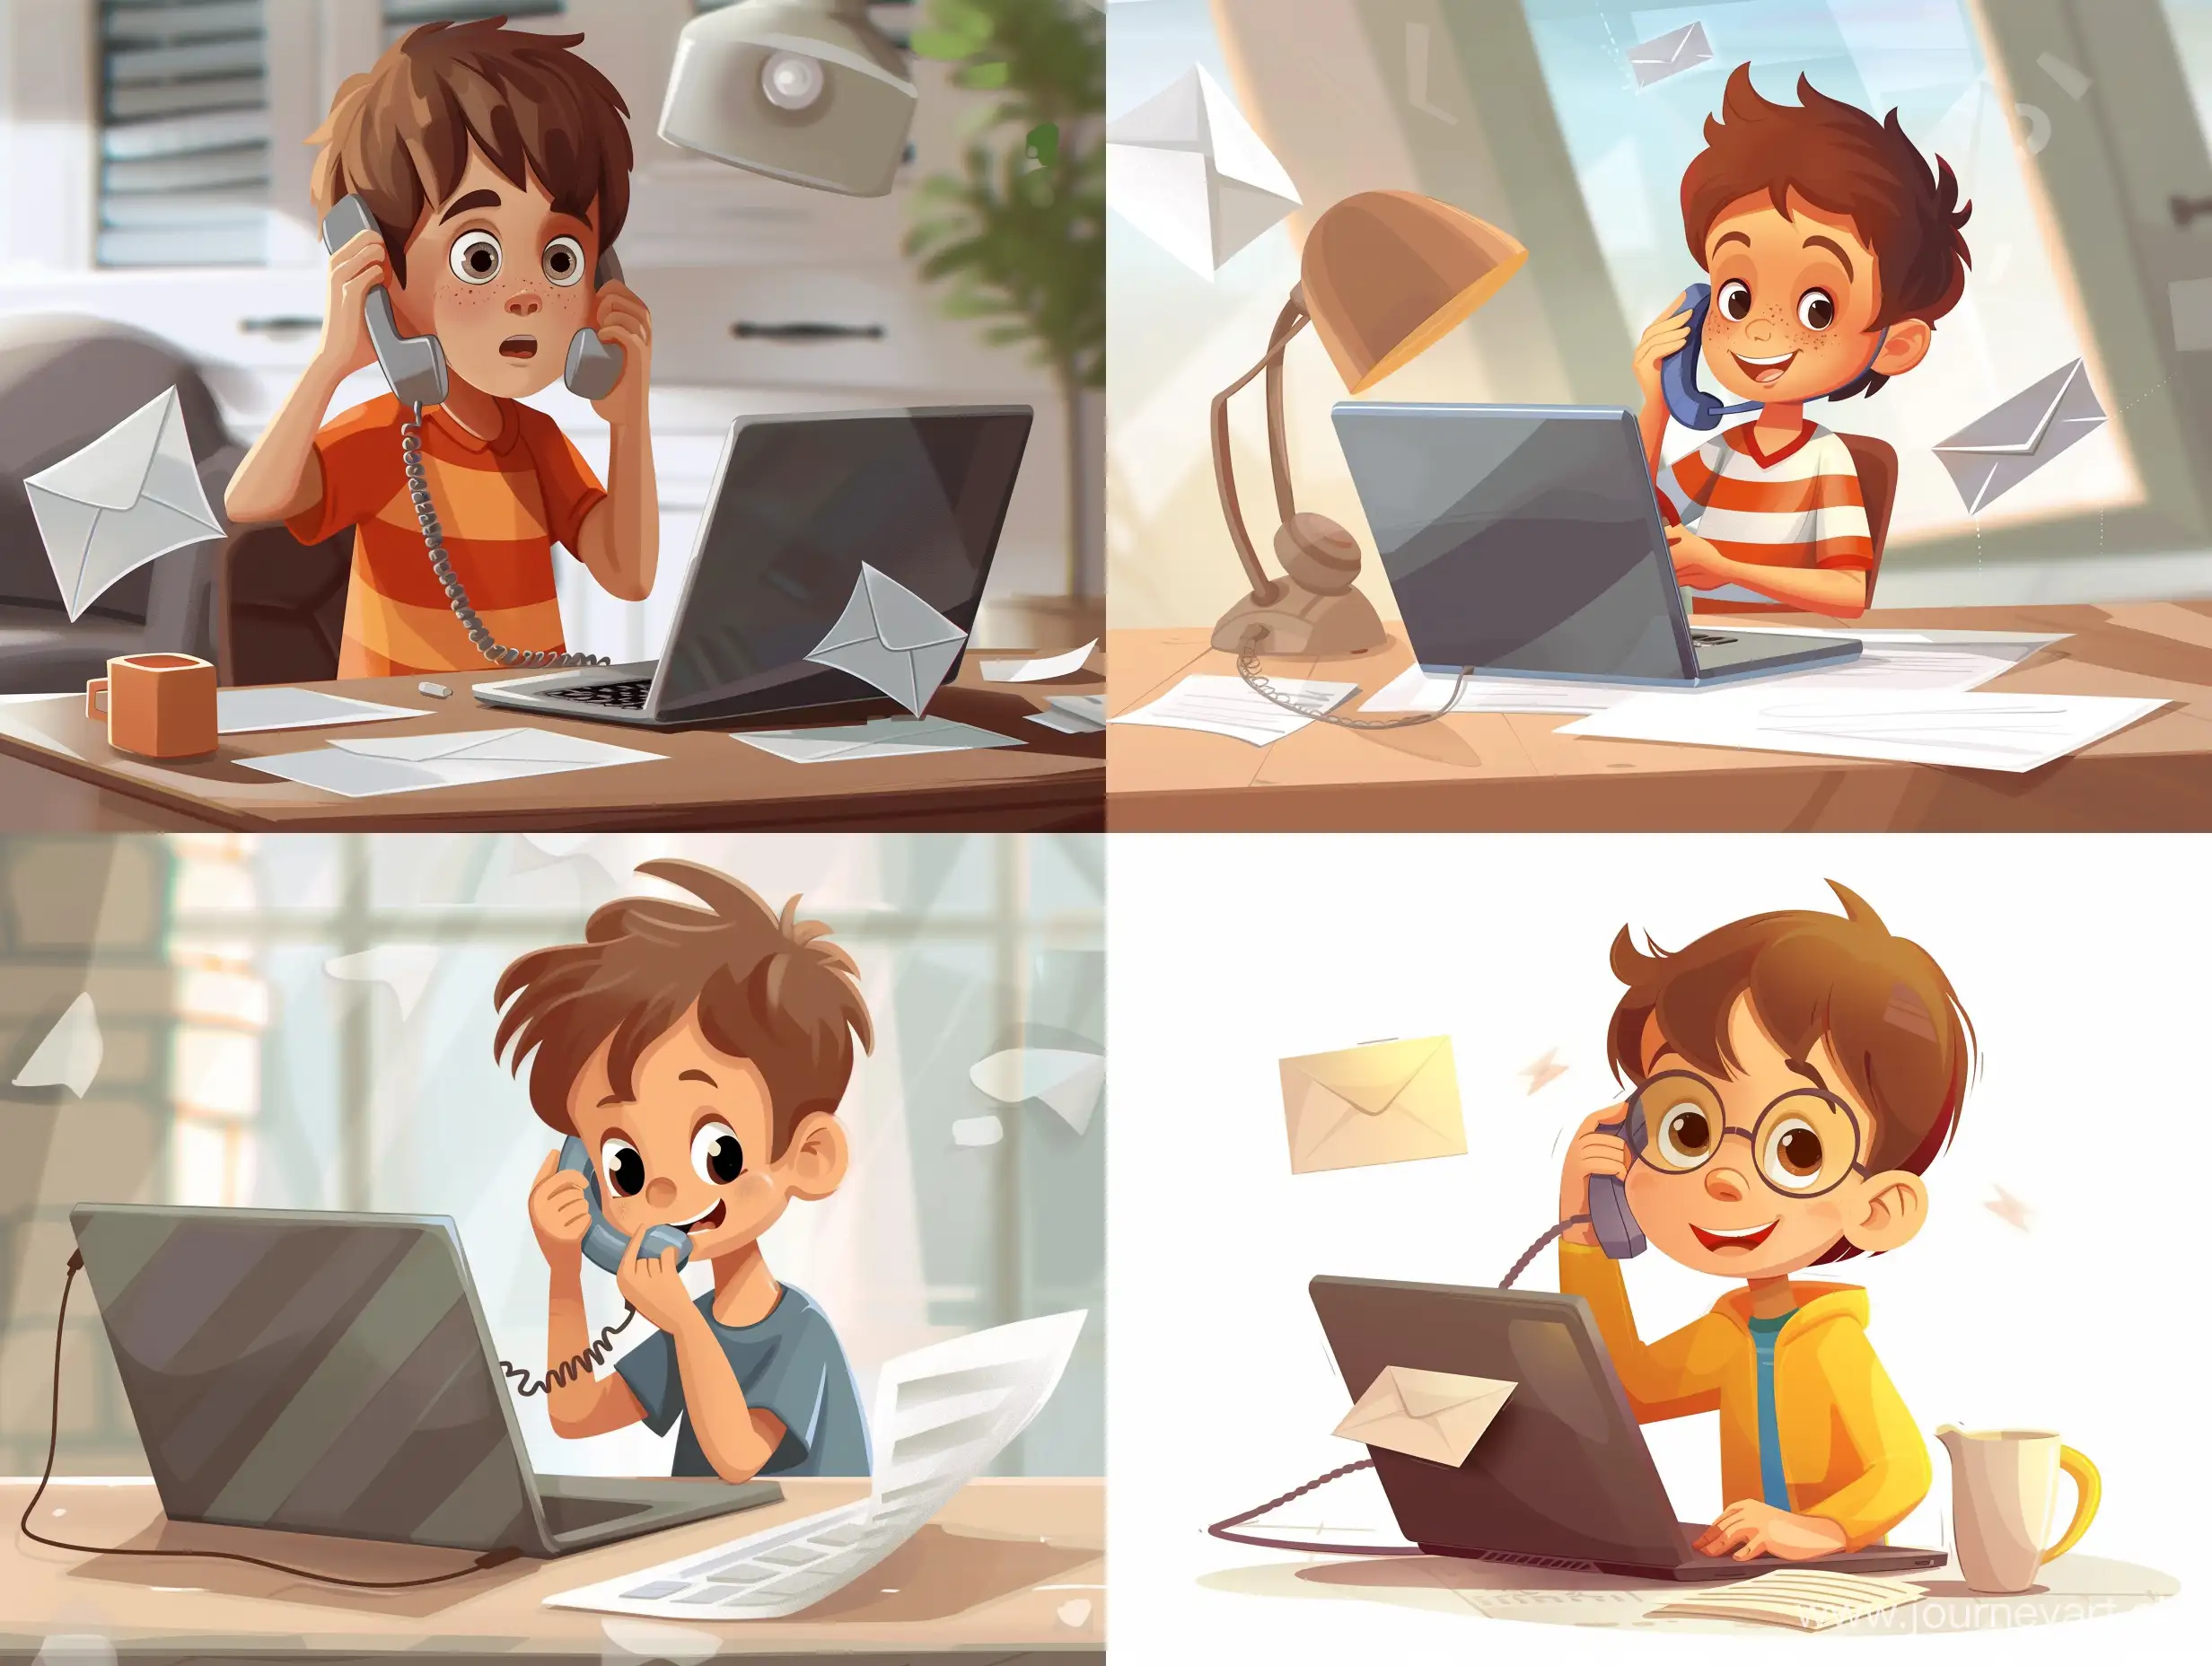 Focused-Cartoon-Boy-Working-on-Laptop-and-Making-Calls